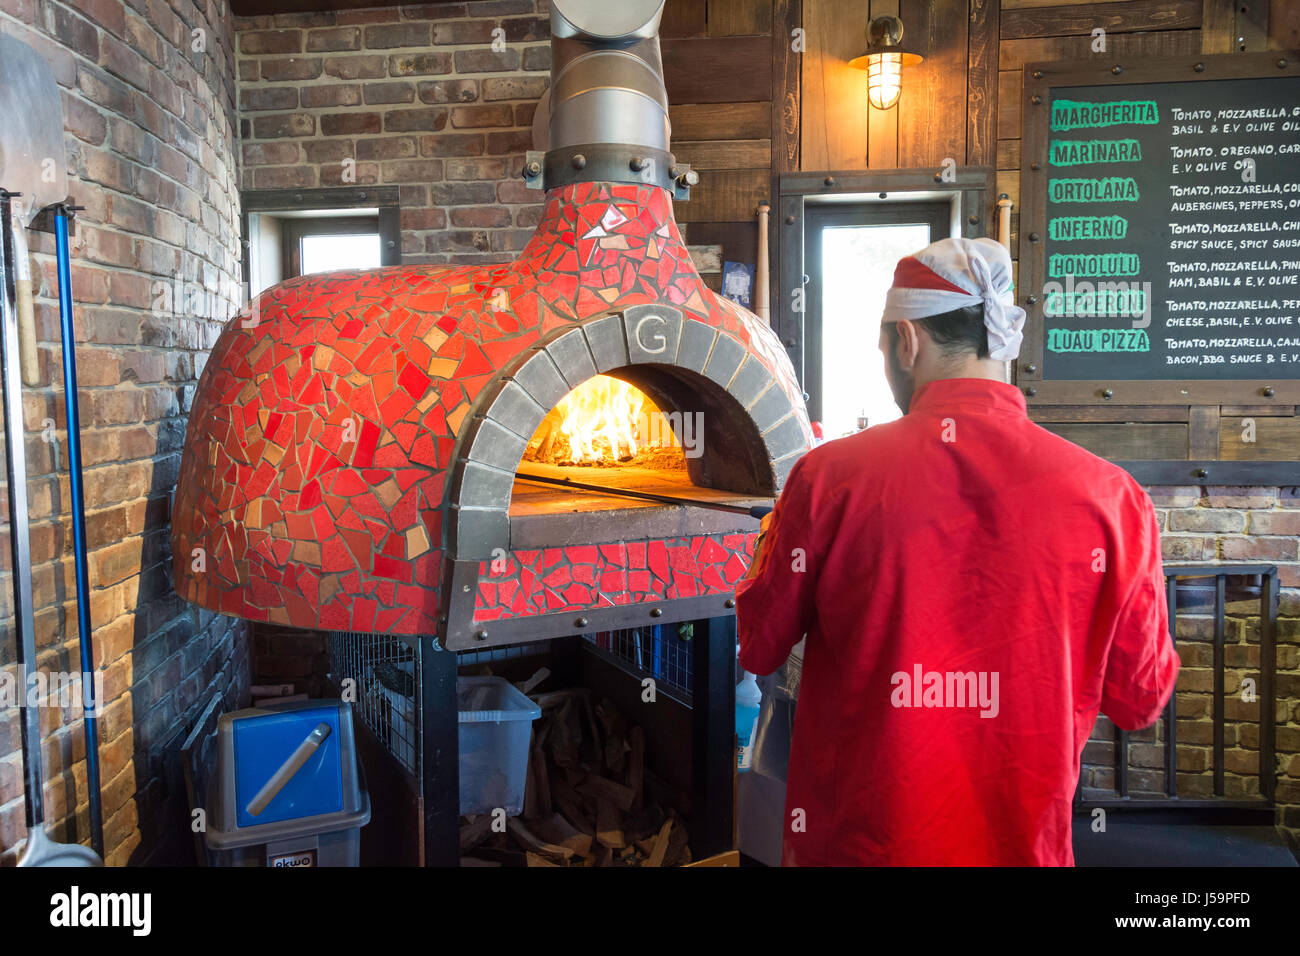 Man cooking pizza in pizza oven, Bournemouth, Dorset, England, United Kingdom Stock Photo